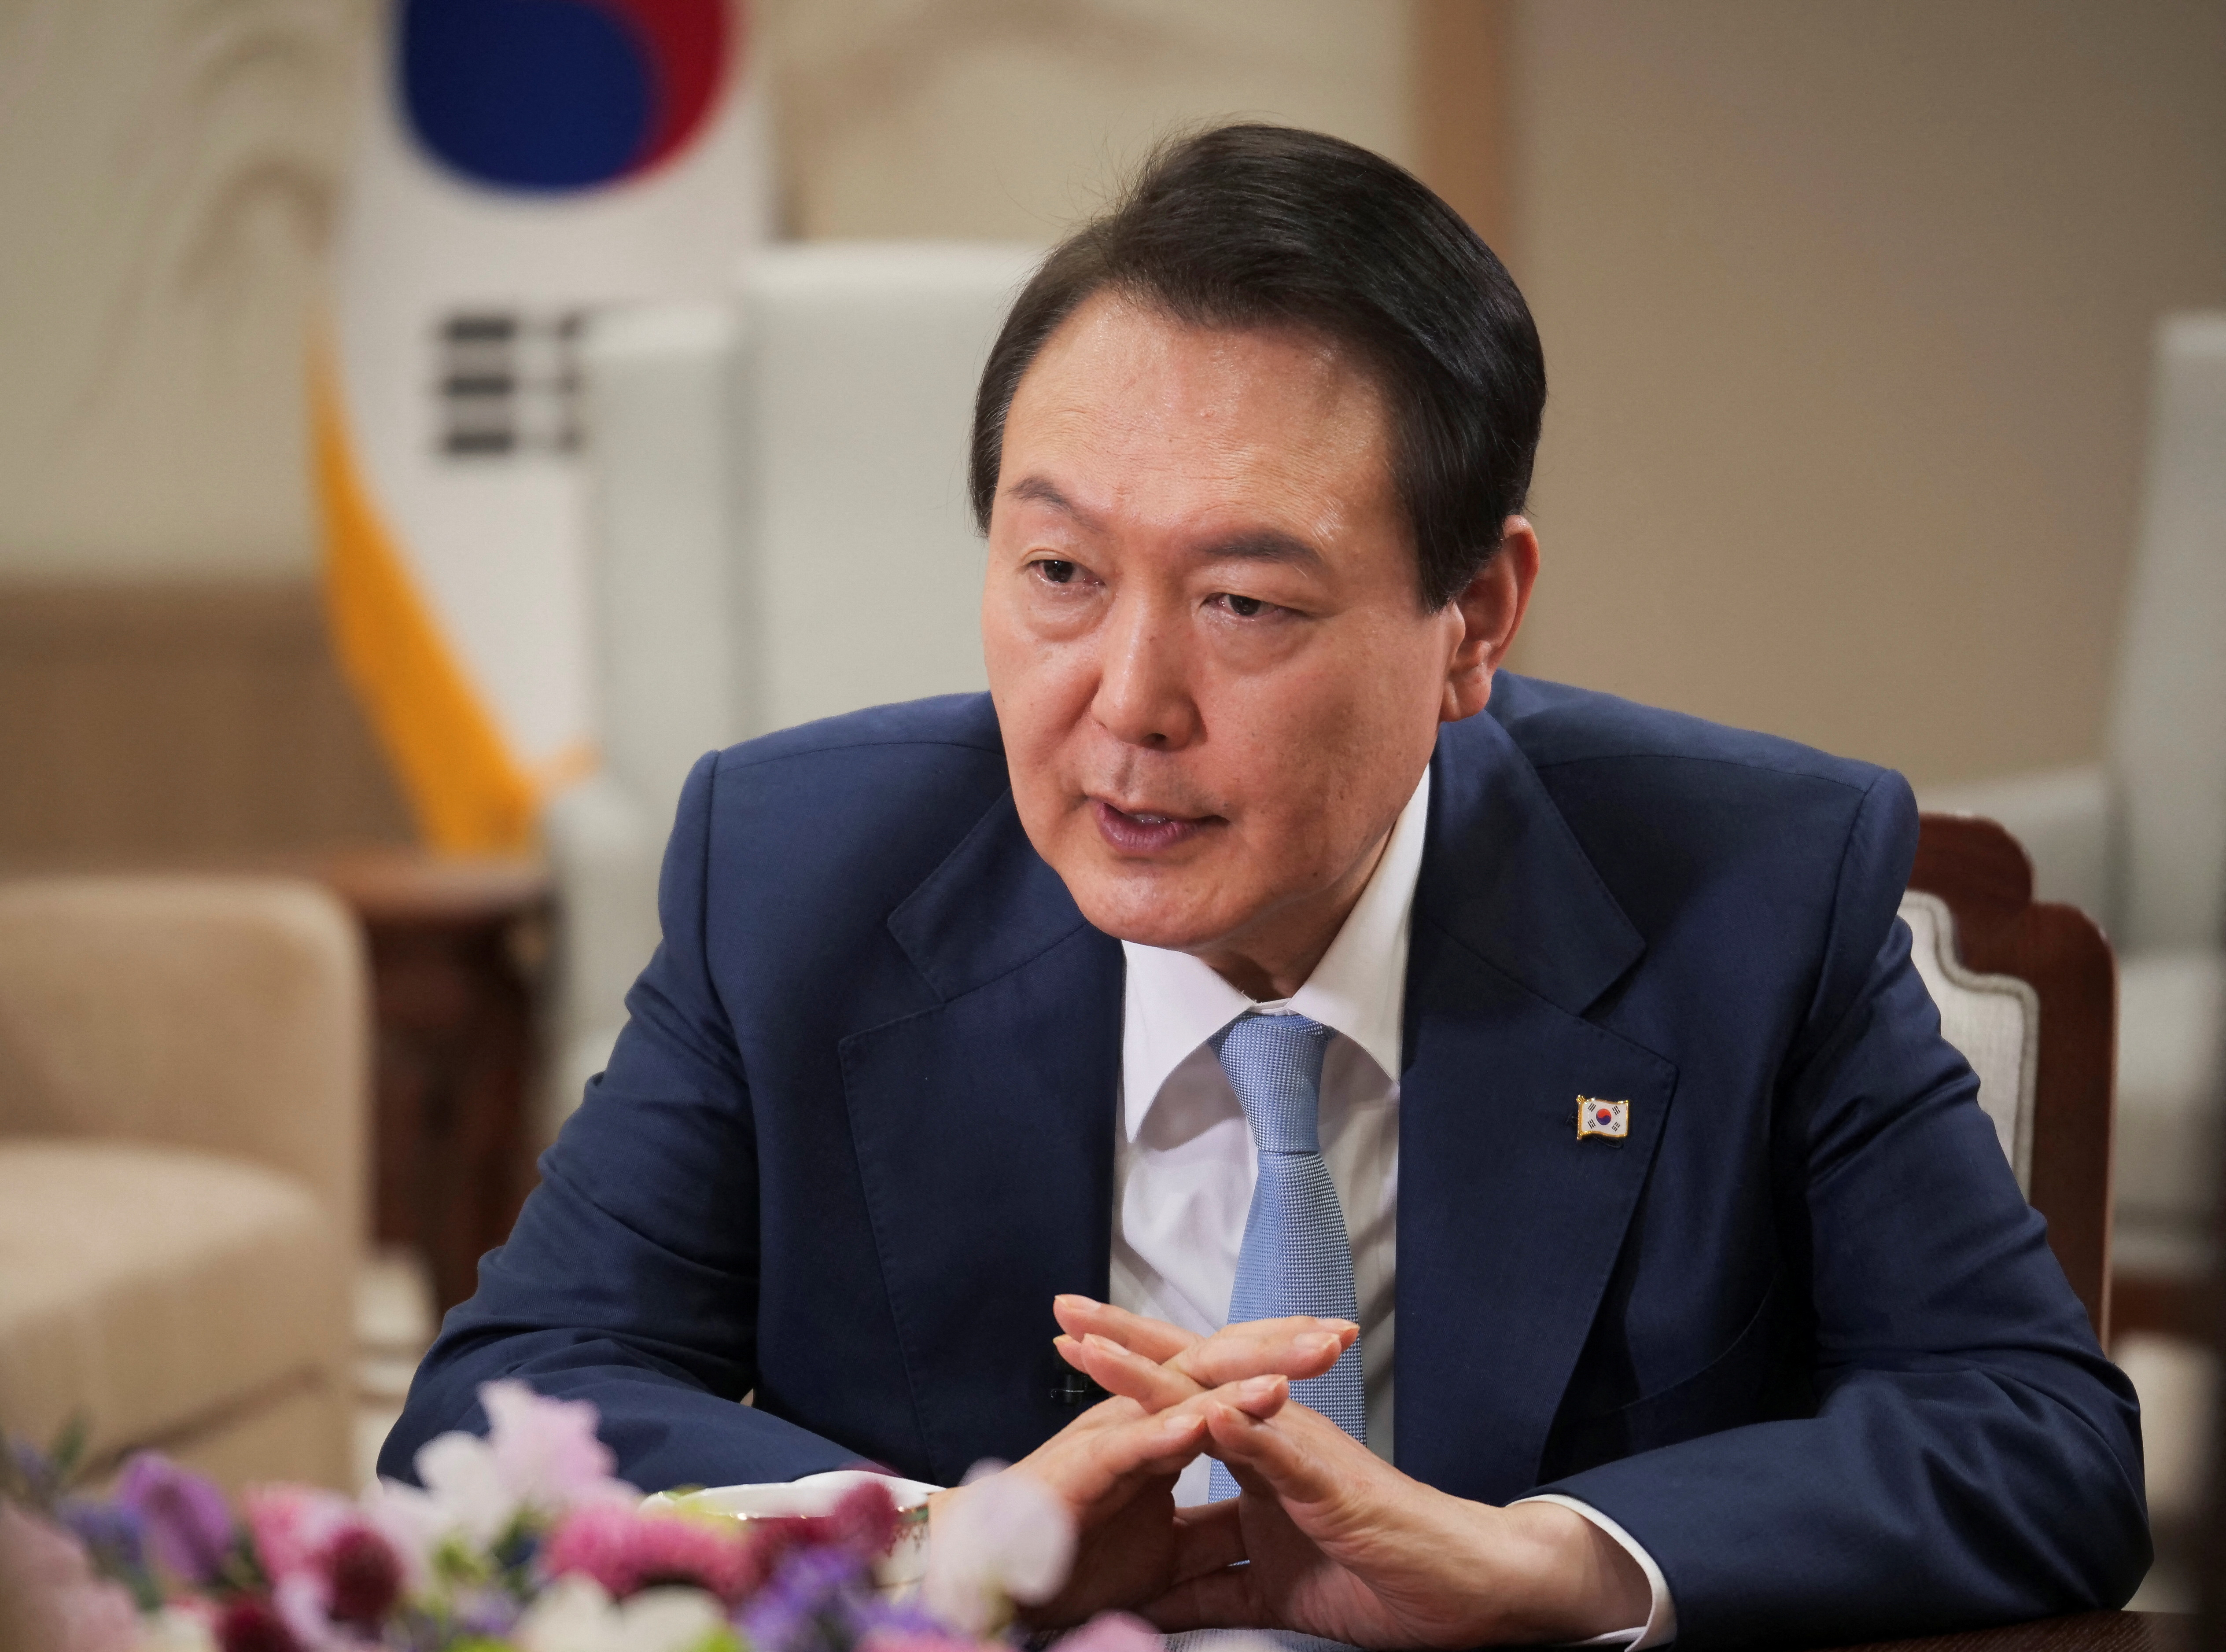 South Korean President Yoon Suk-yeol attends an interview with Reuters in Seoul